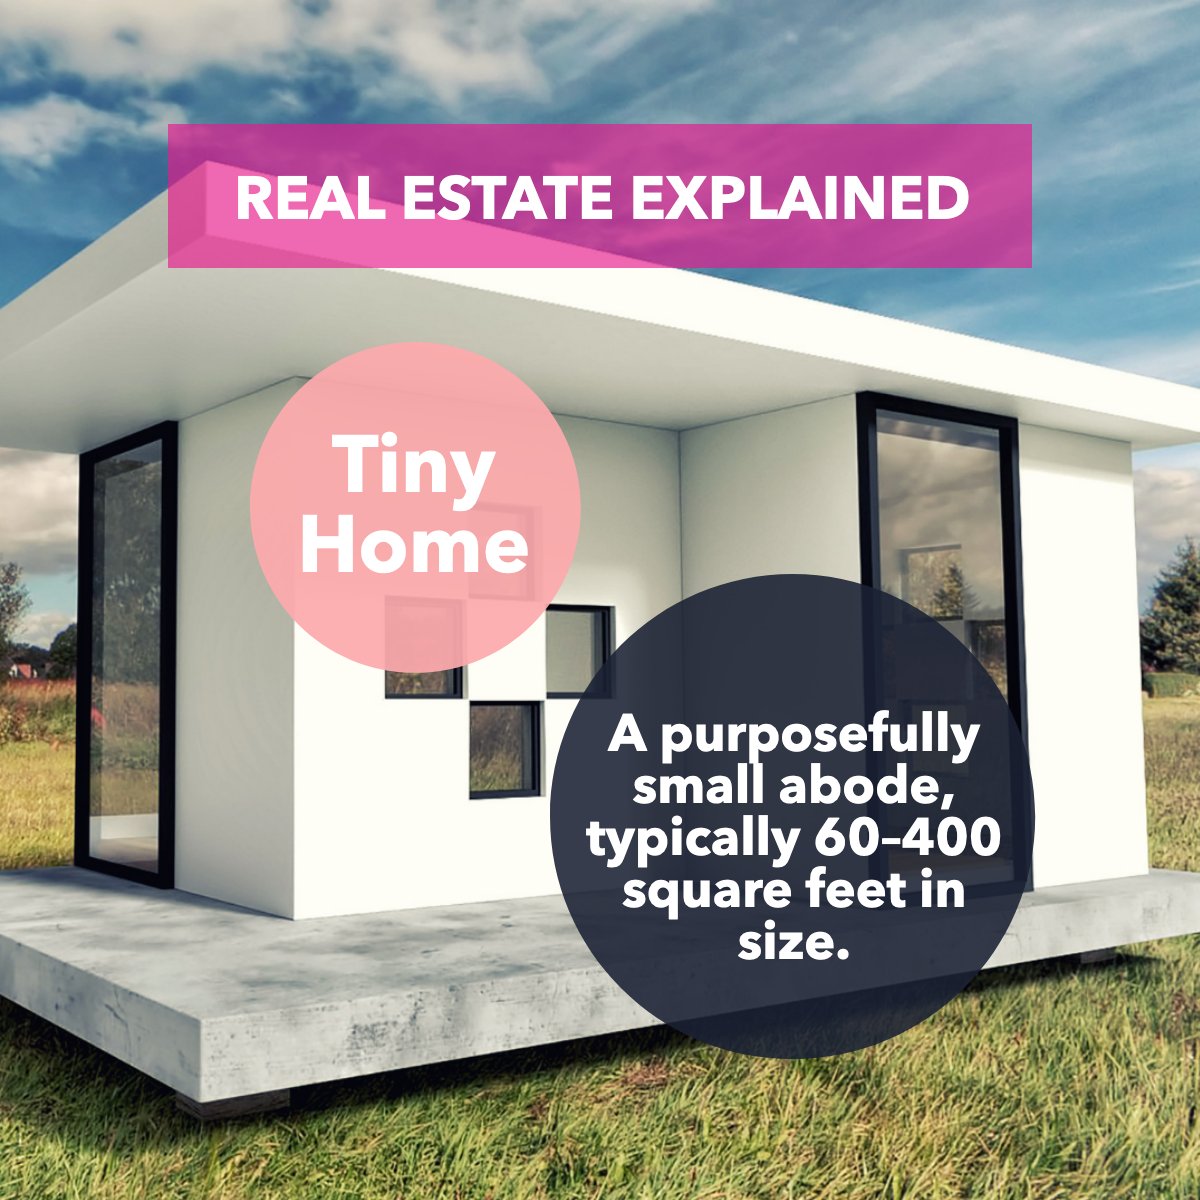 Did you know what a Tiny Home is? 🏡

Let us know below!

#tinyhomes #tinylovelyhome #tinyhomestyle 
 #RacingRealEstateAgent #BarrettRealEstate #StoneTreeRealEstateTeam #maricopaazrealestate #racingagent #arizonarealestate #phoenixrealestateagent #nascarfanrealtor